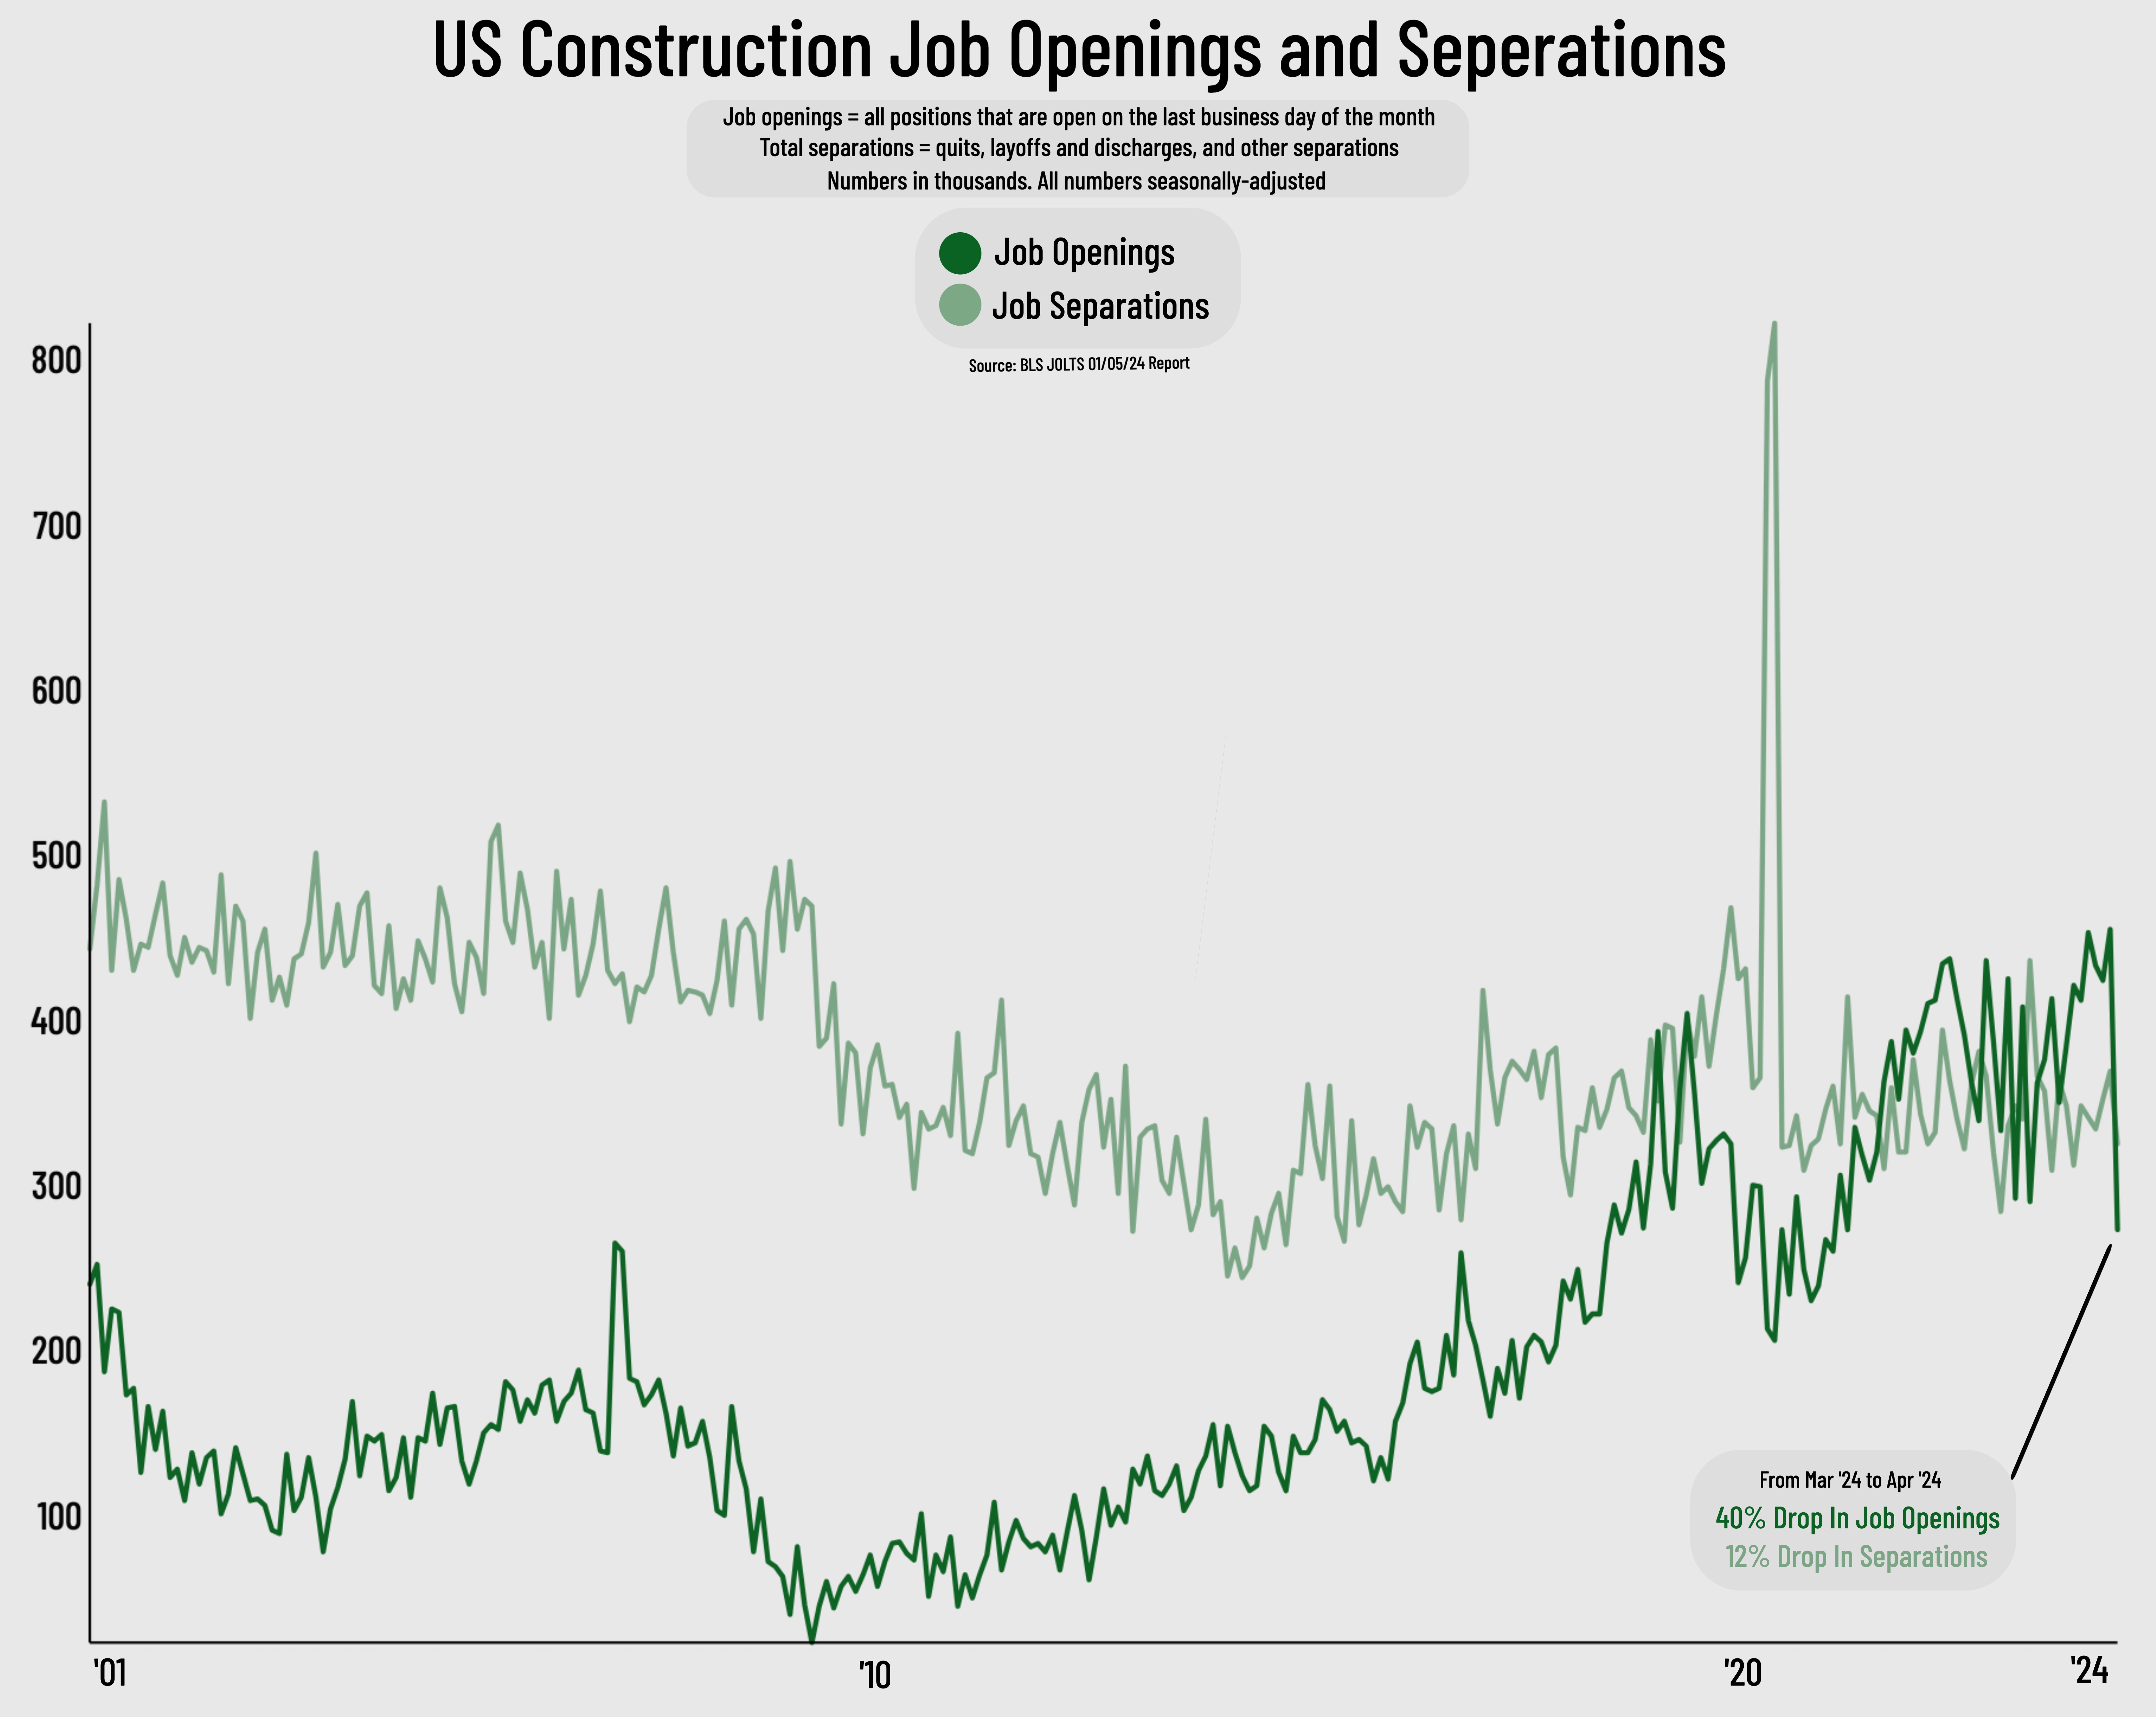 US Construction Job Openings and Separations